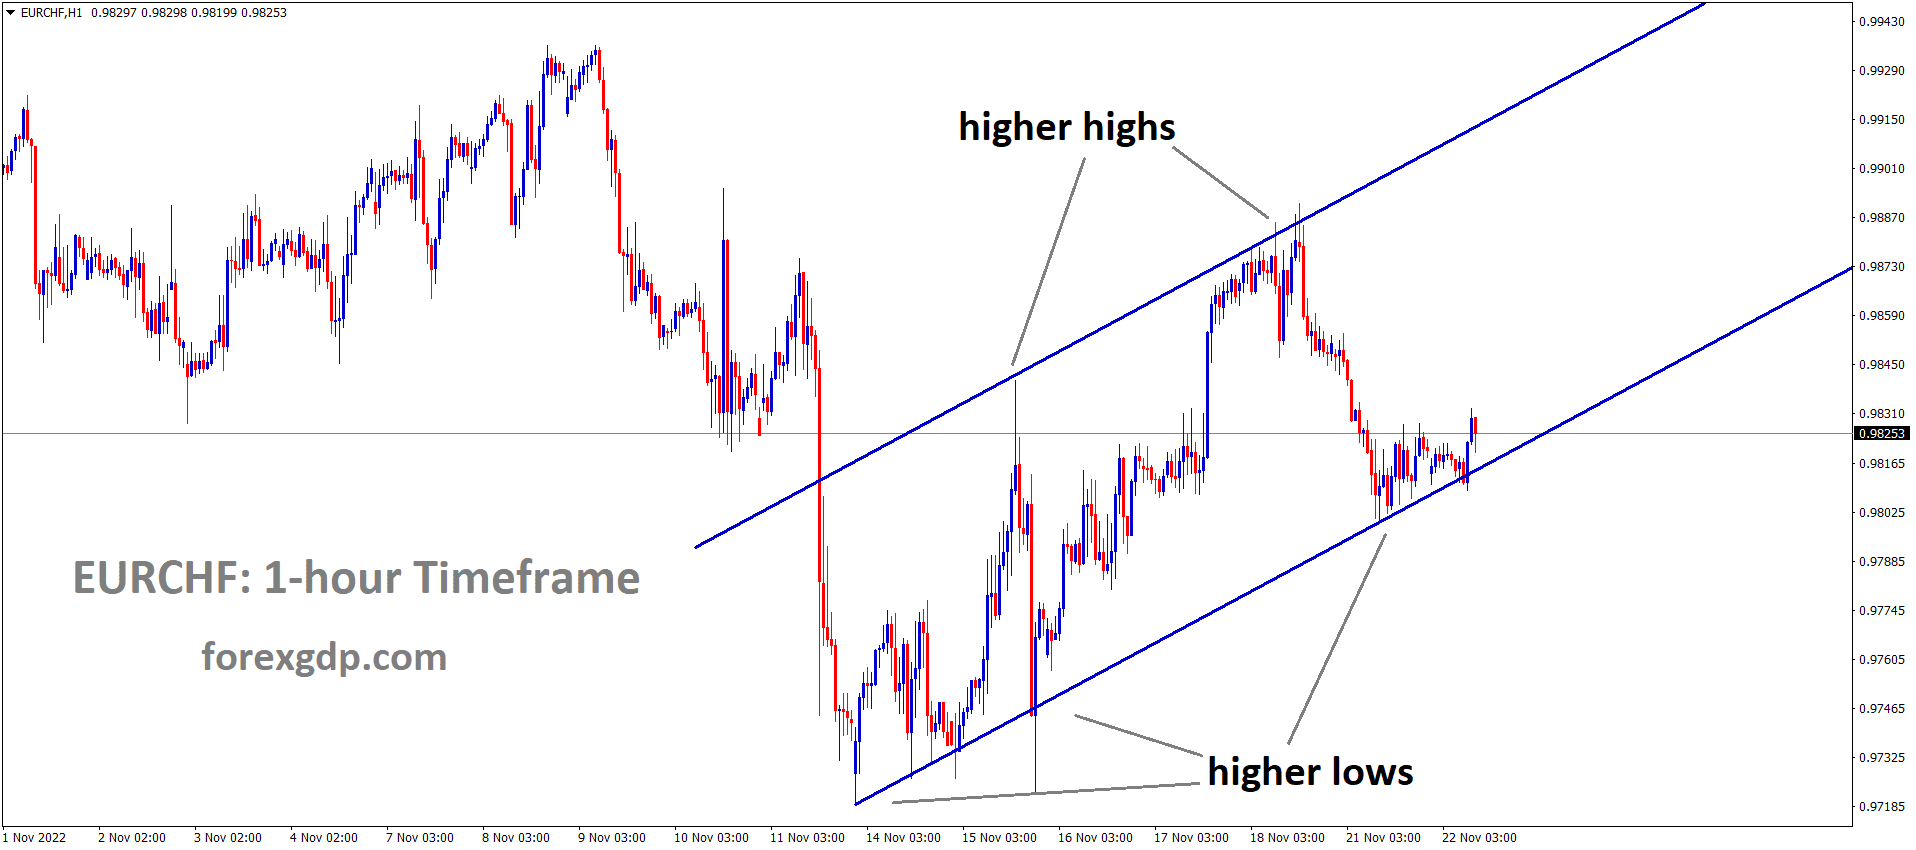 EURCHF is moving in an Ascending channel and the market has rebounded from the higher low area of the channel.